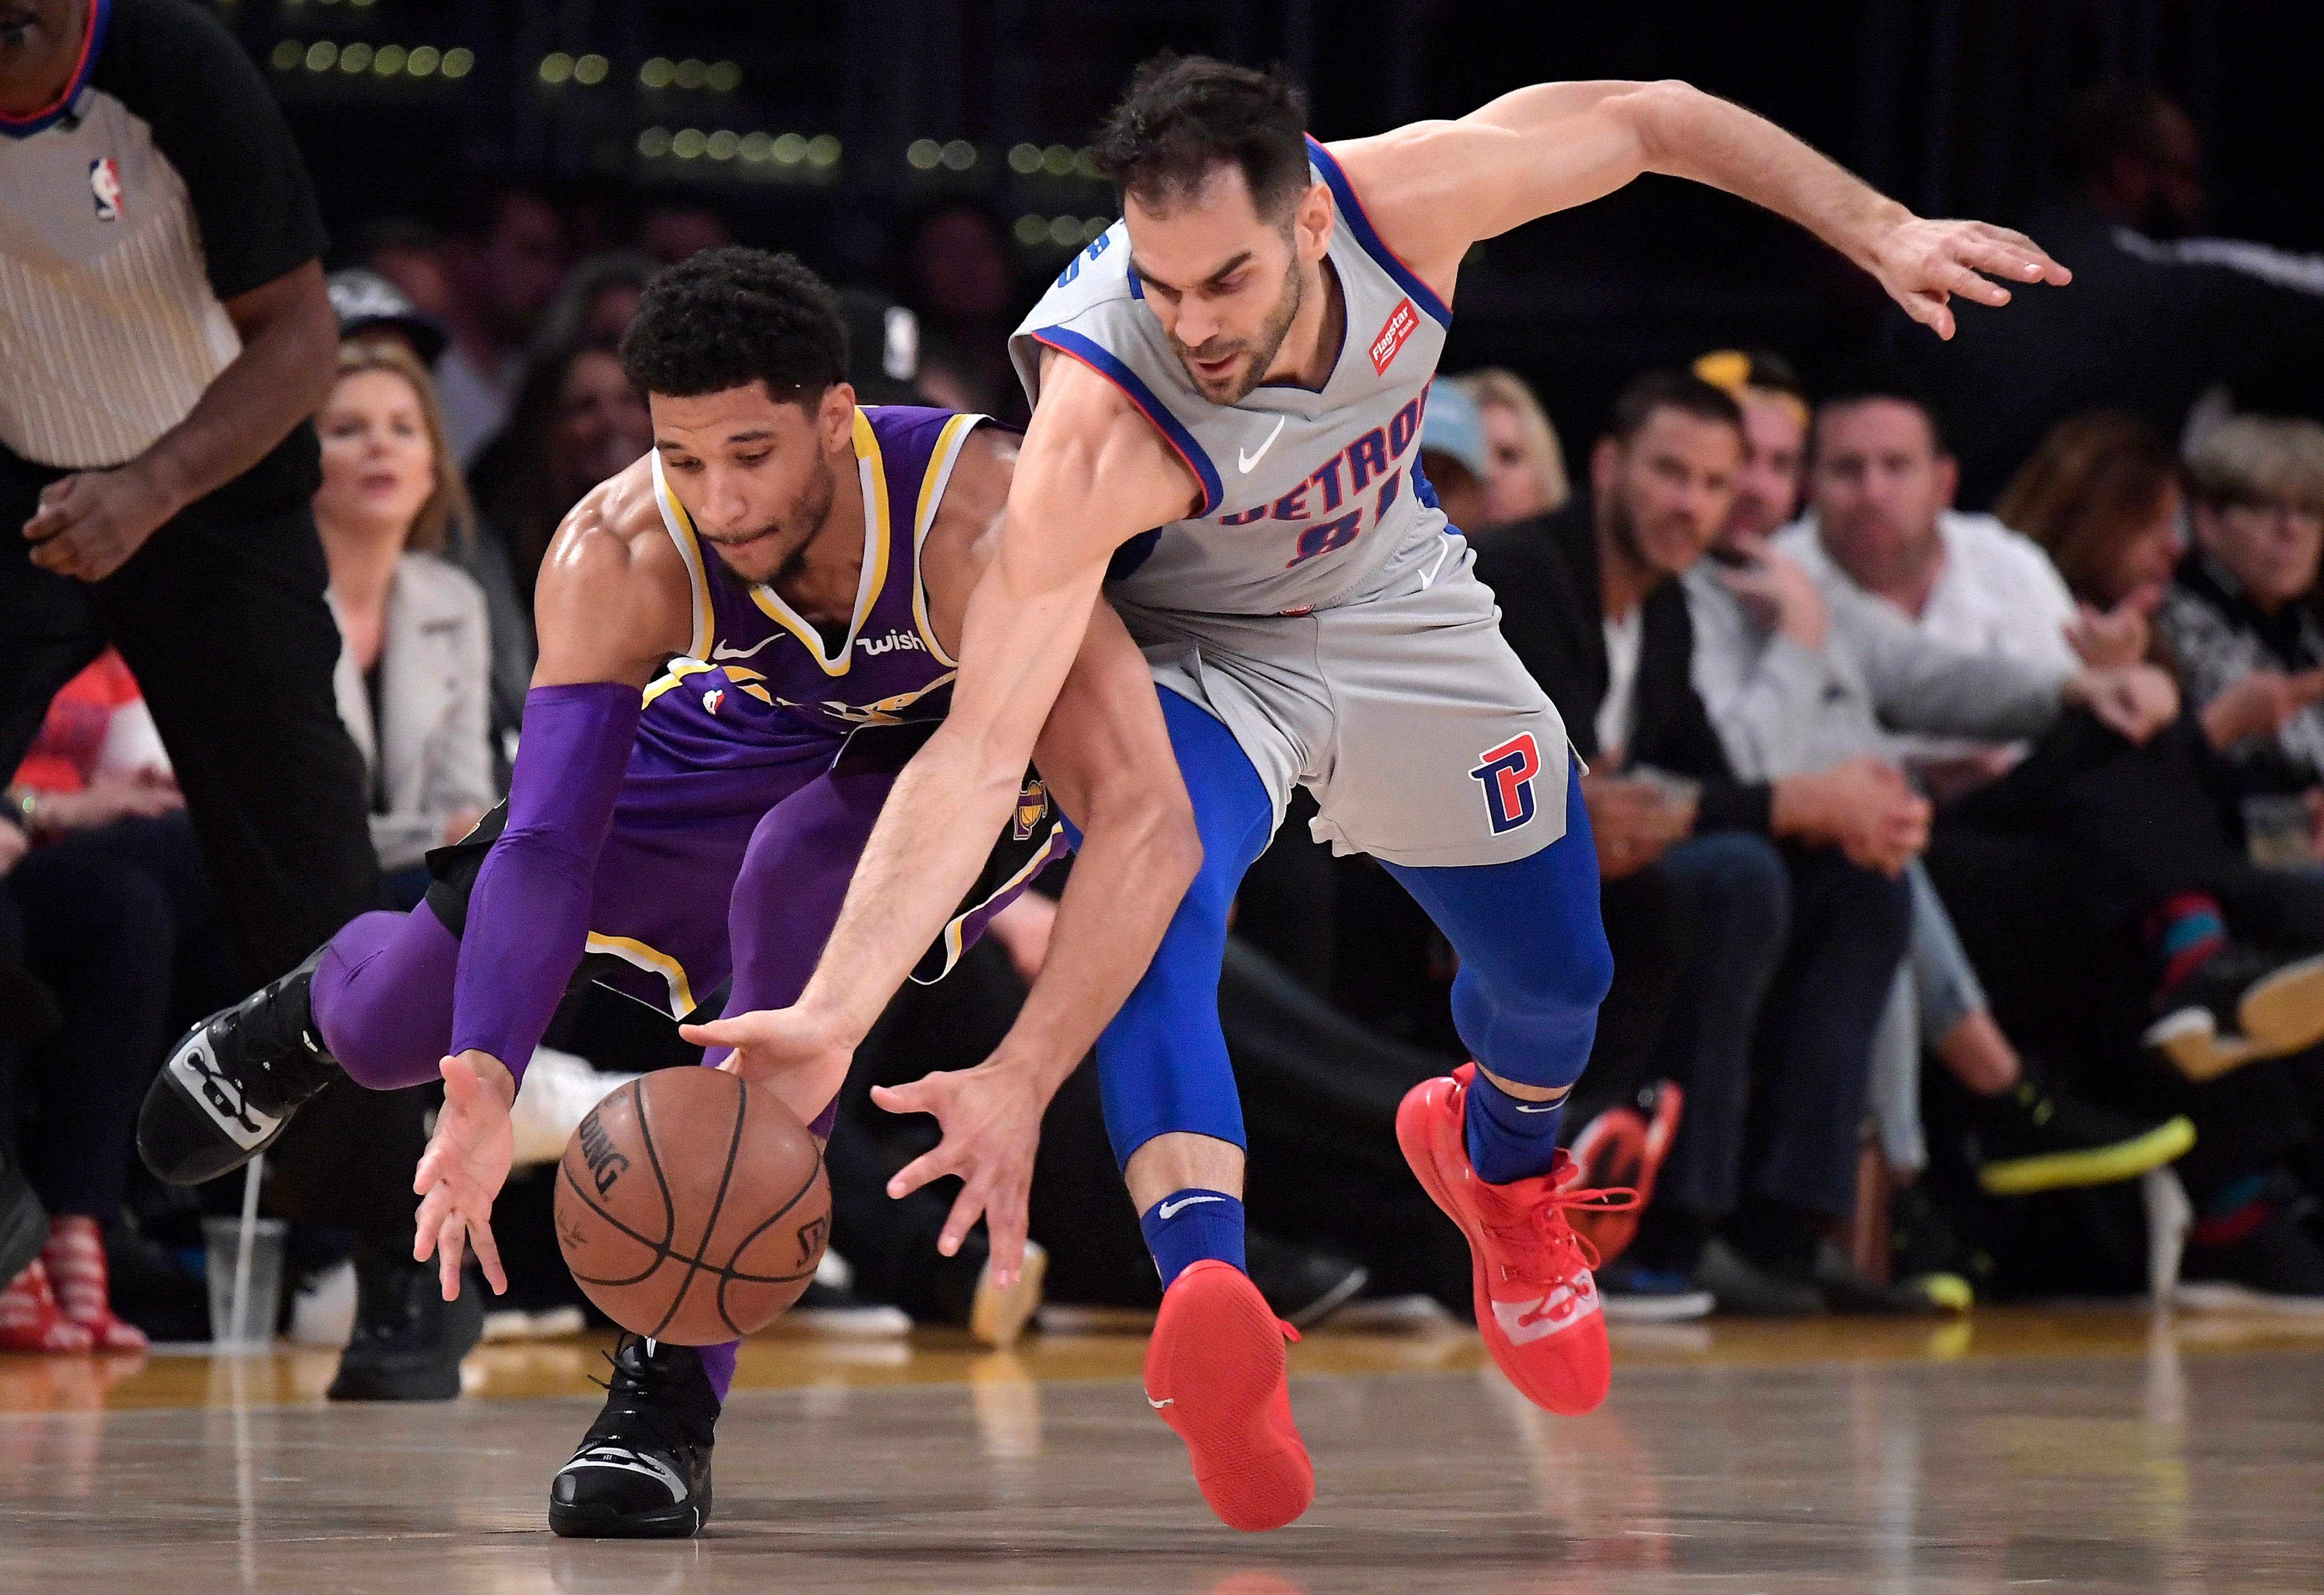 Los Angeles Lakers guard Josh Hart, left, and Detroit Pistons guard Jose Calderon go after a loose ball during the first half of an NBA basketball game Wednesday, Jan. 9, 2019, in Los Angeles. The Lakers won the game, 113-100.